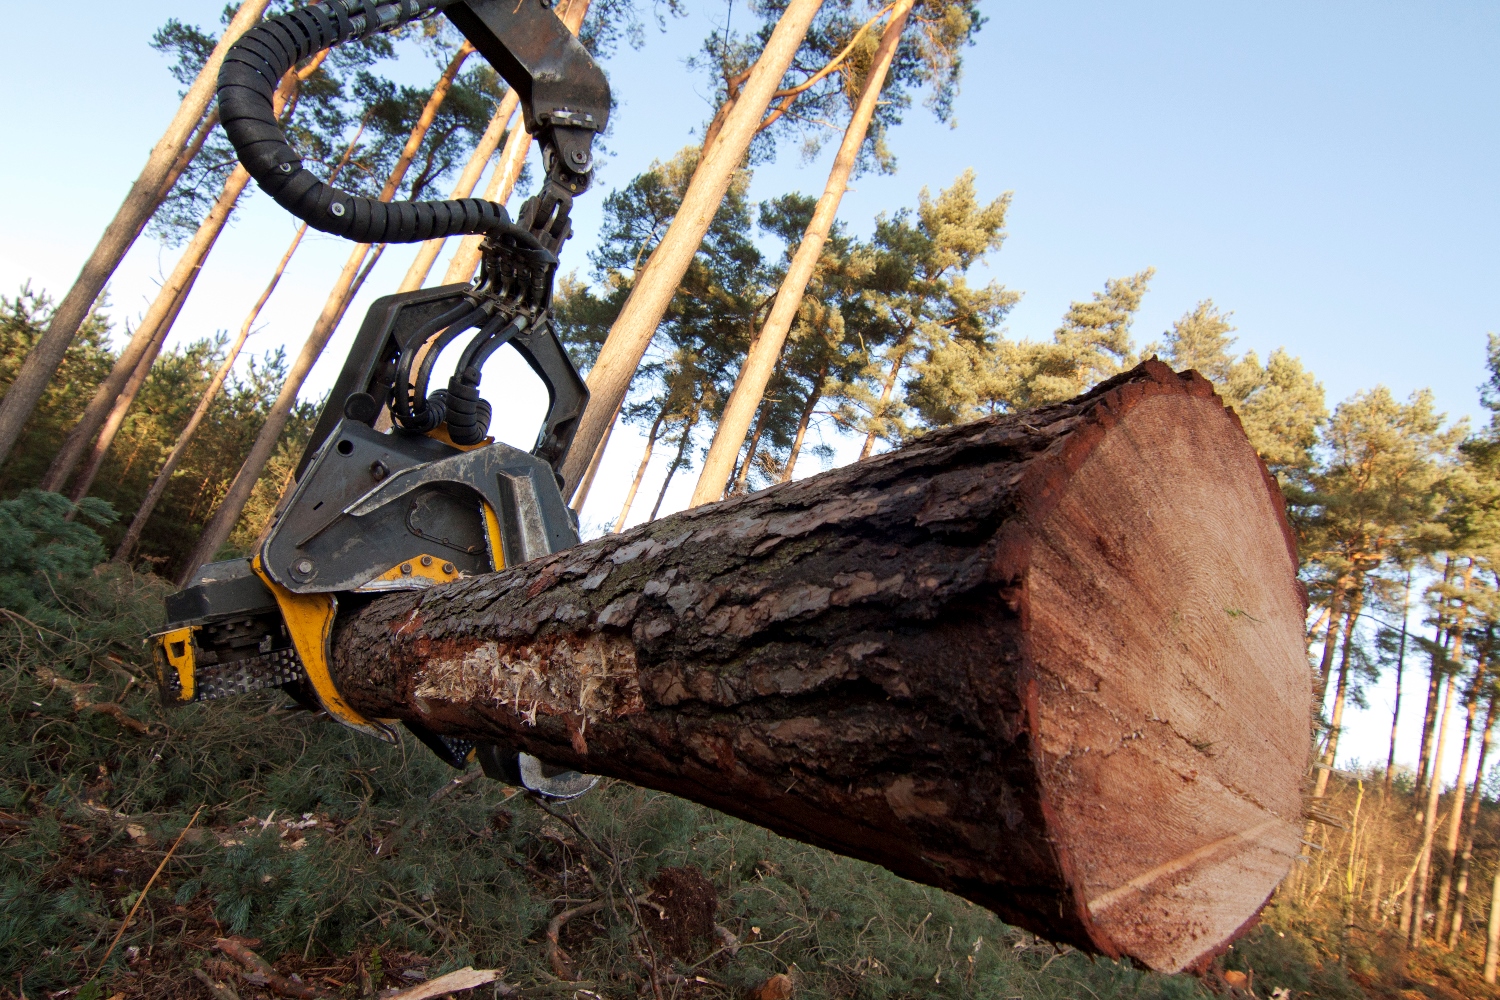 A TRUSTED SERVICE FOR TREE FELLING IN CARDIFF